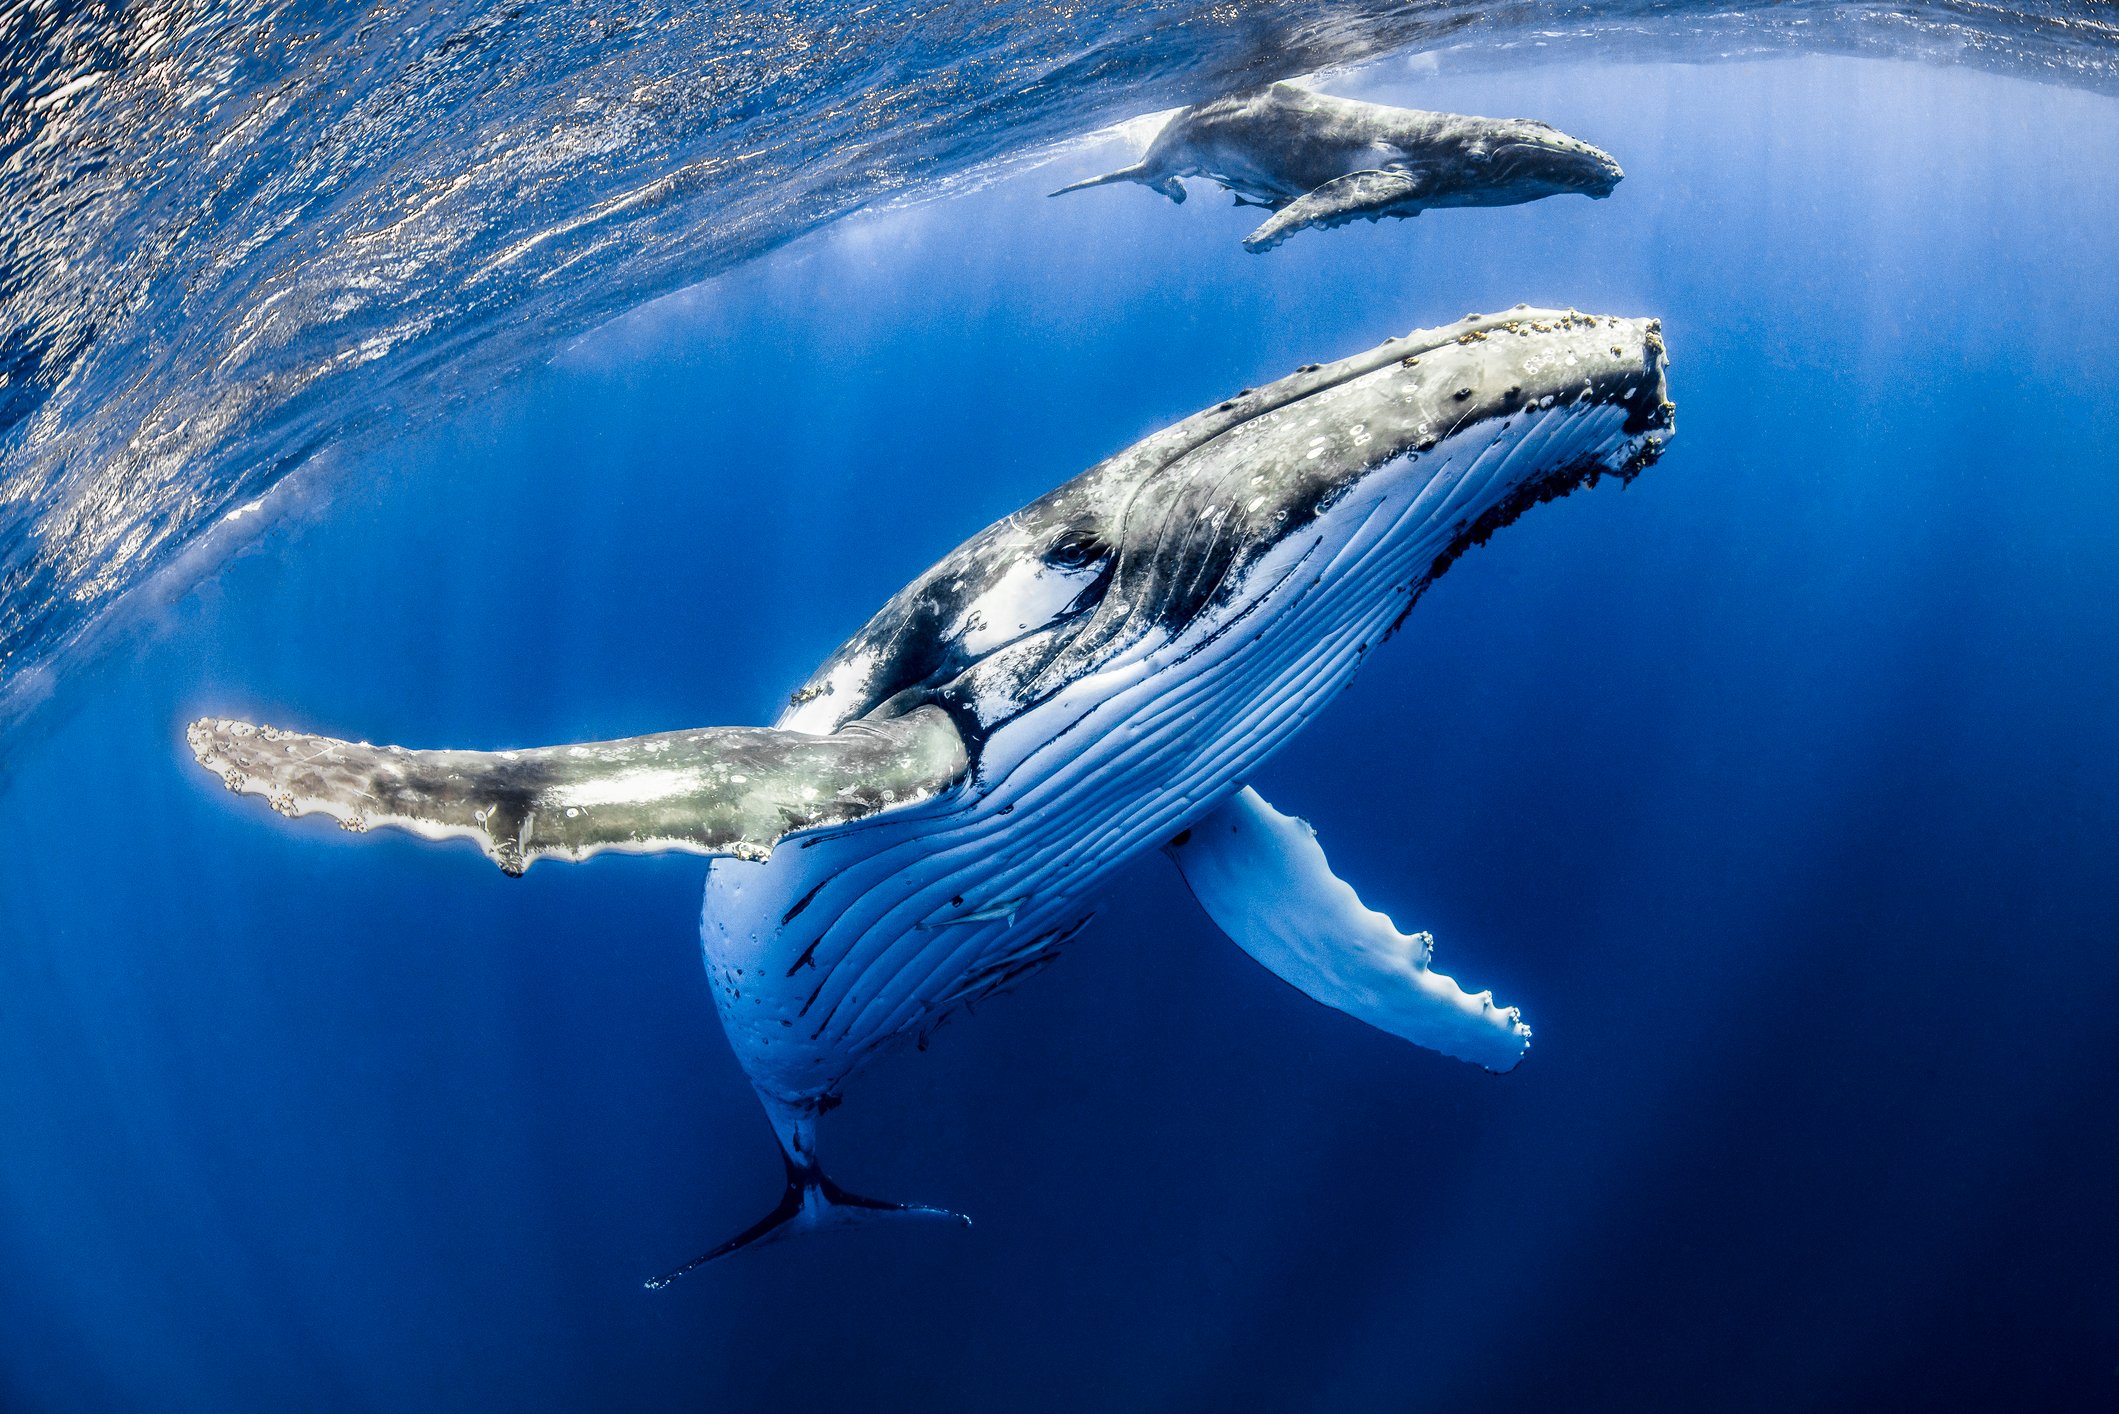 Humpback mother and calf, with a snorkeler, in Tonga